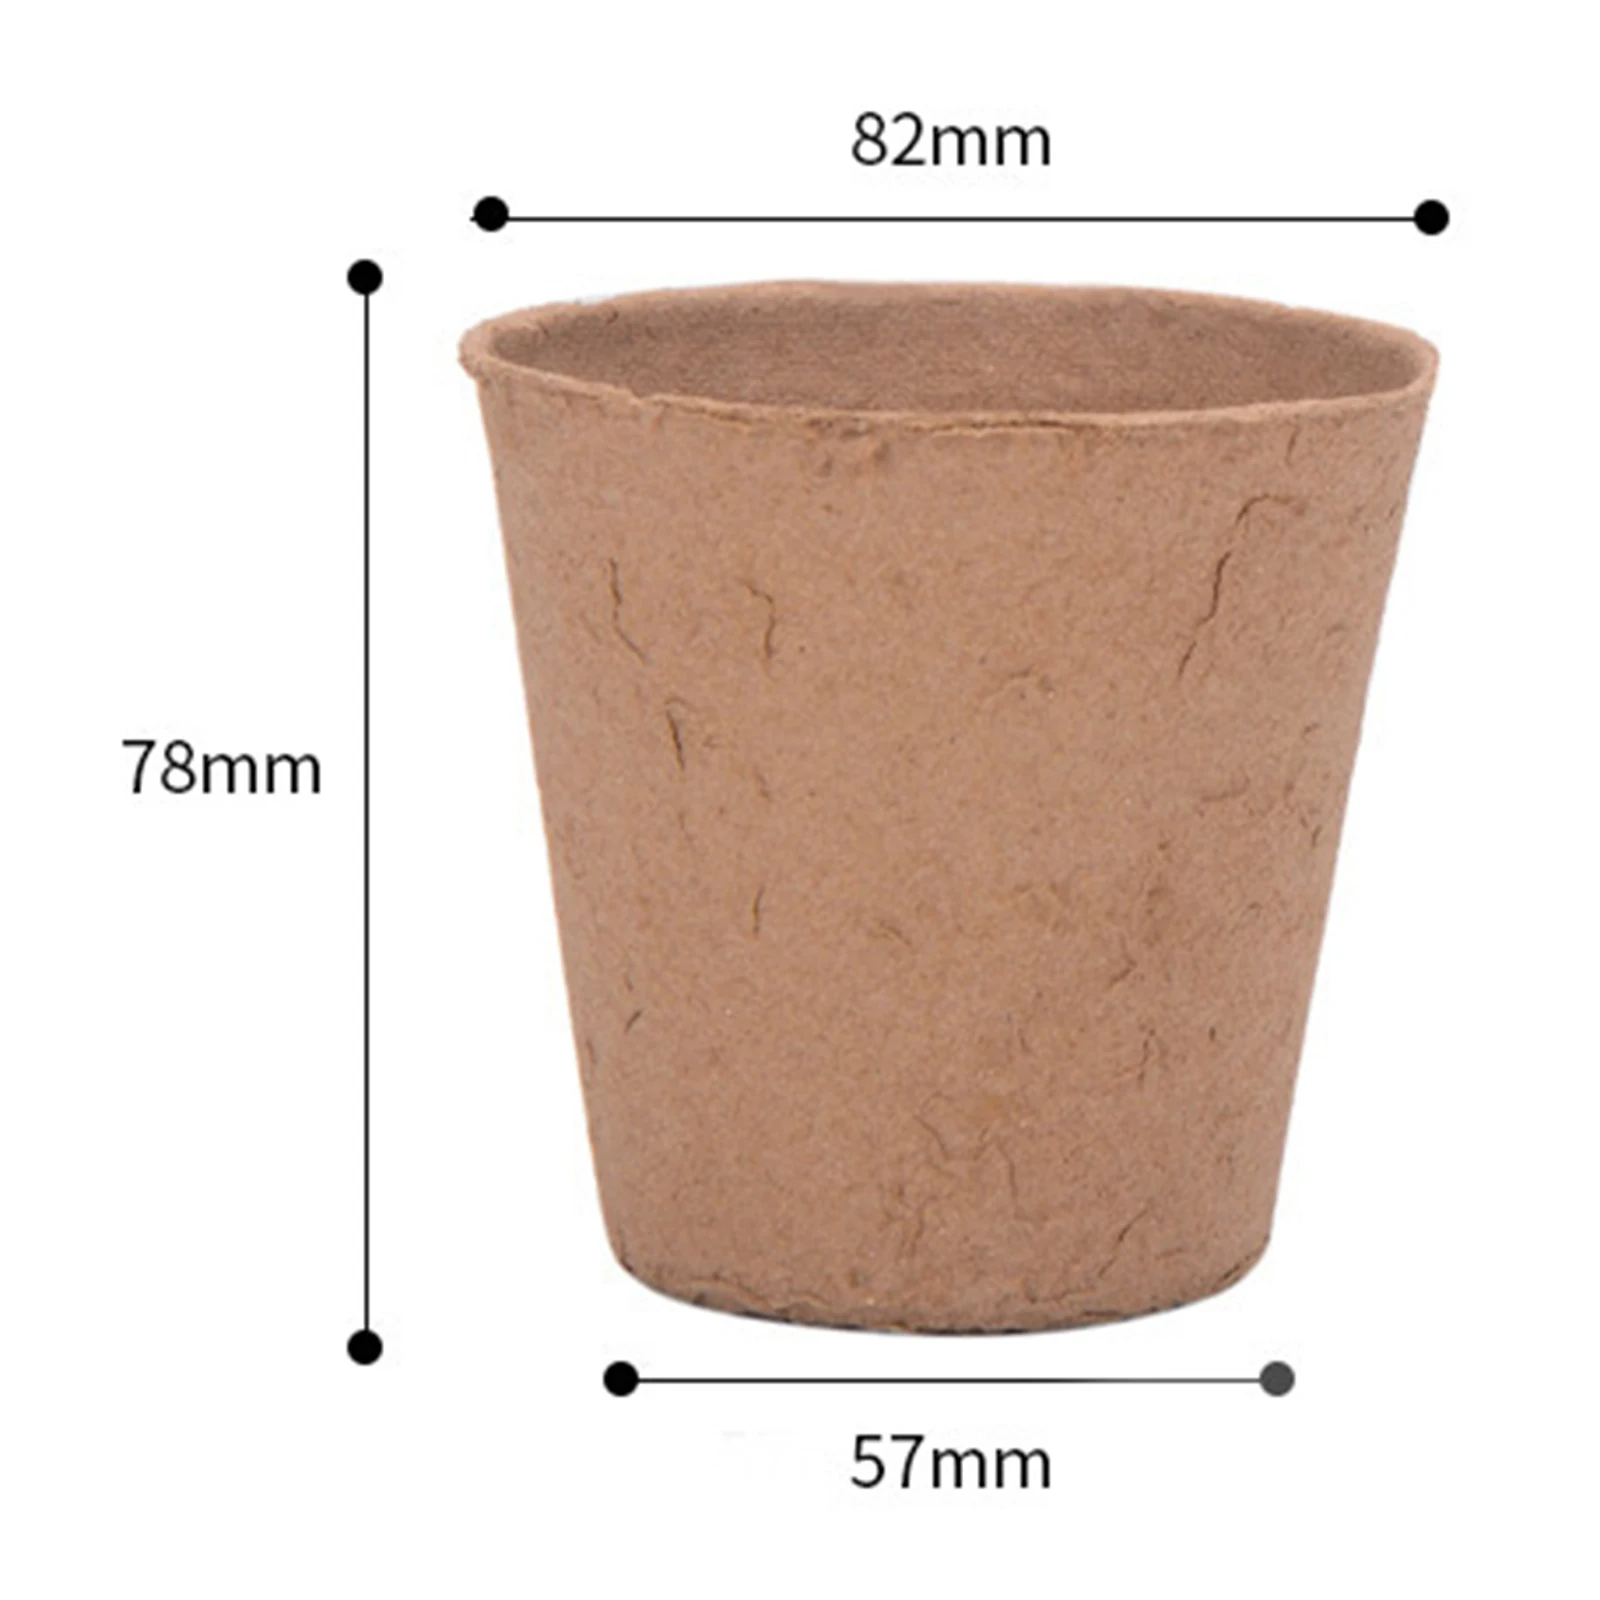 

25PCS Peat Pots For Seedlings Gardening Seed Starter Tray Kit Biodegradable Plant Starting Pots 8CM Pulp Cups Garden Nursery